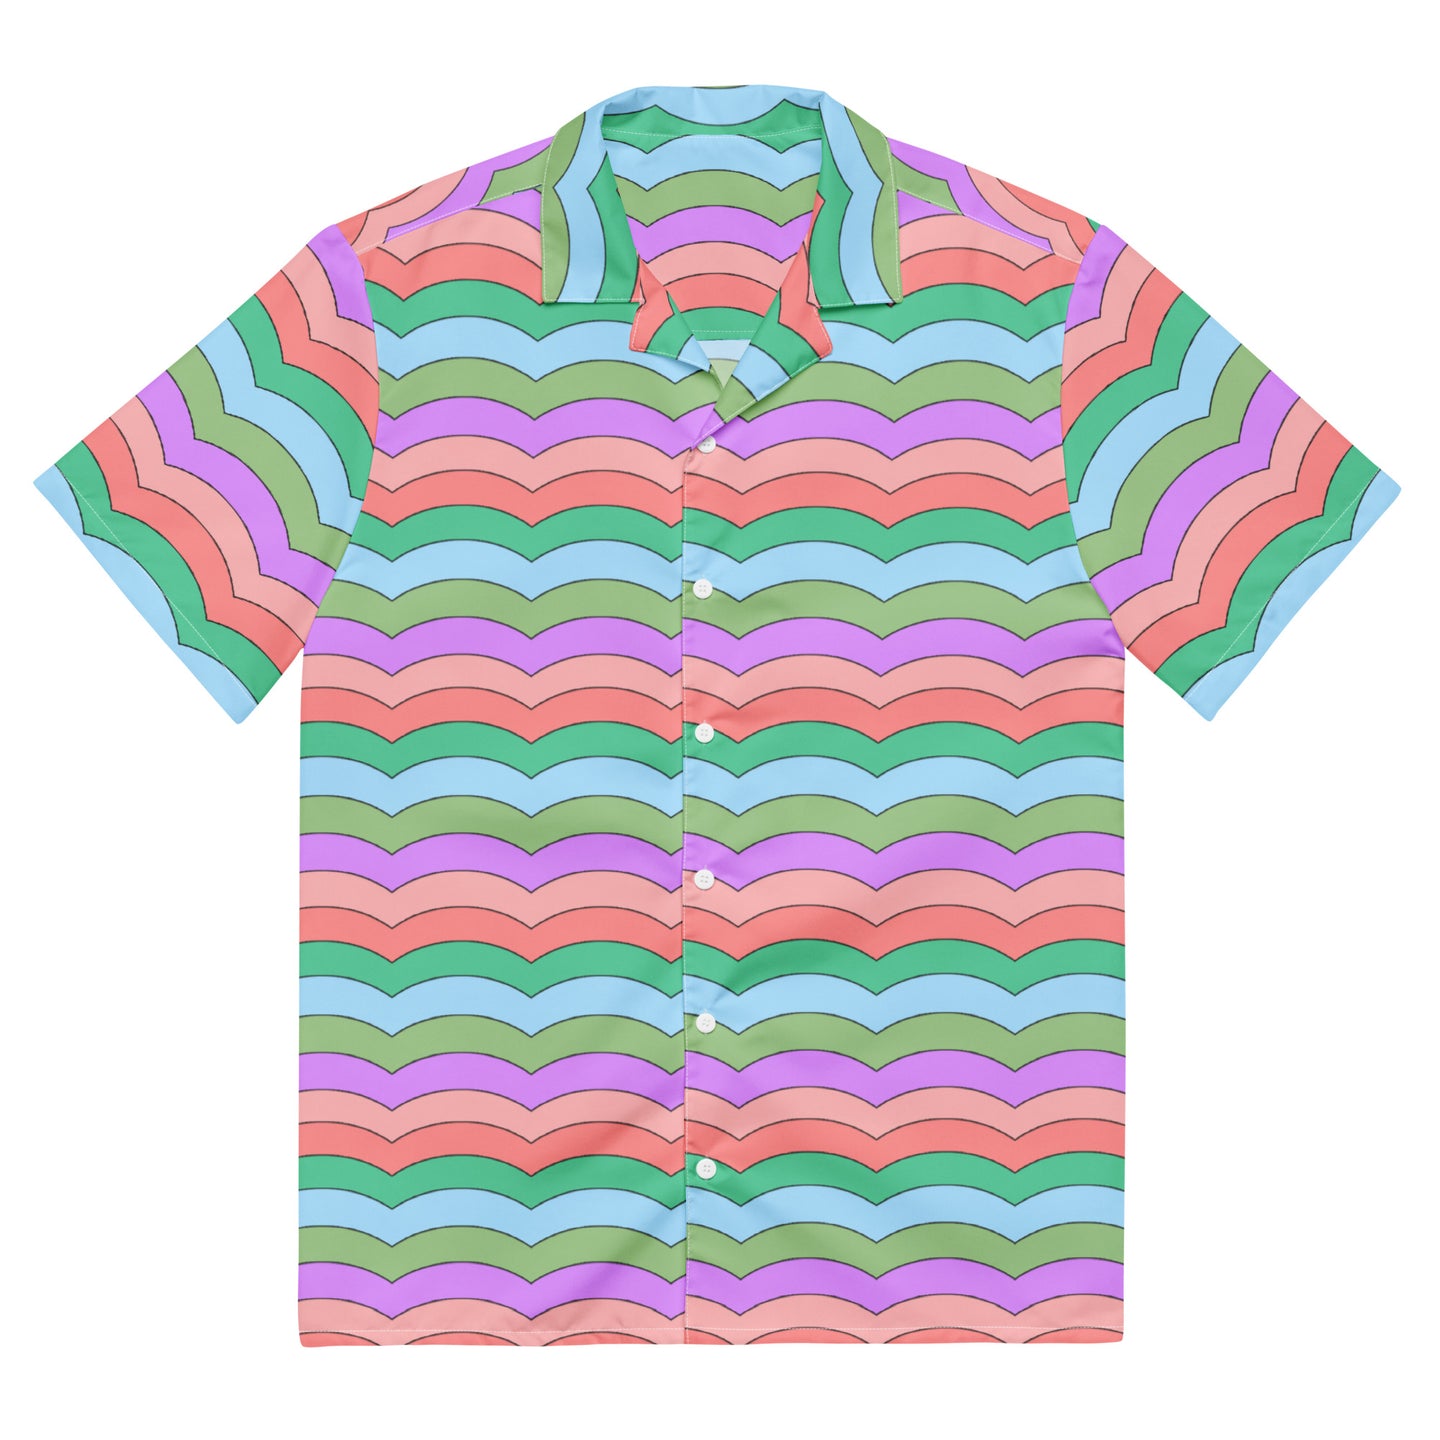 Waves Of Life Unisex button shirt